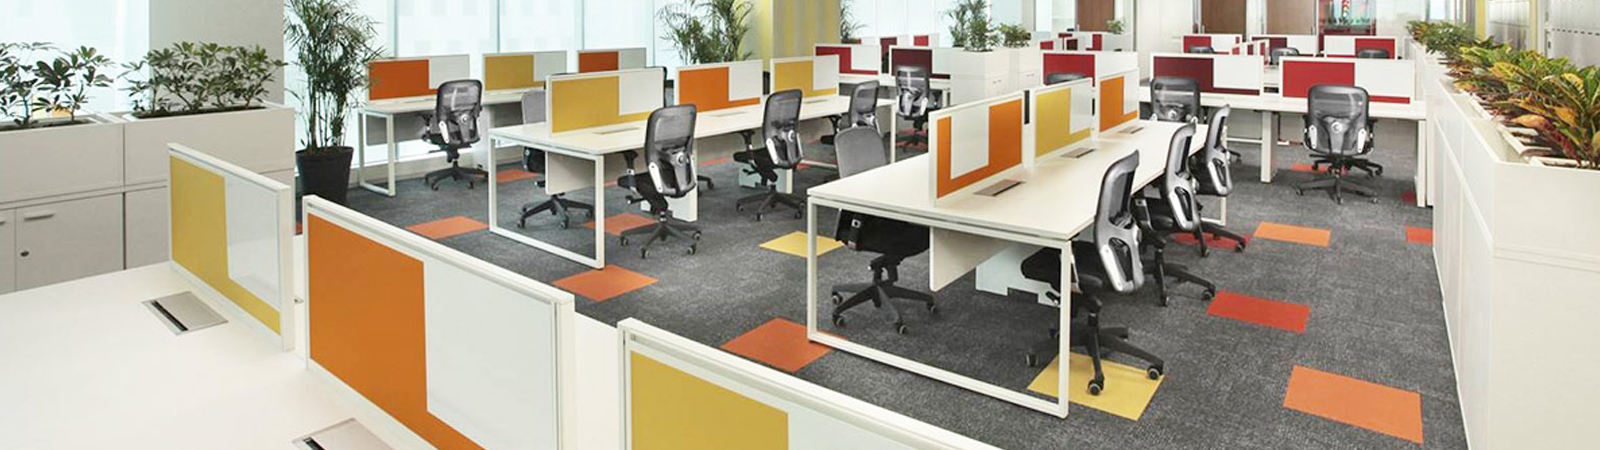 Student Chairs in Delhi NCR, India